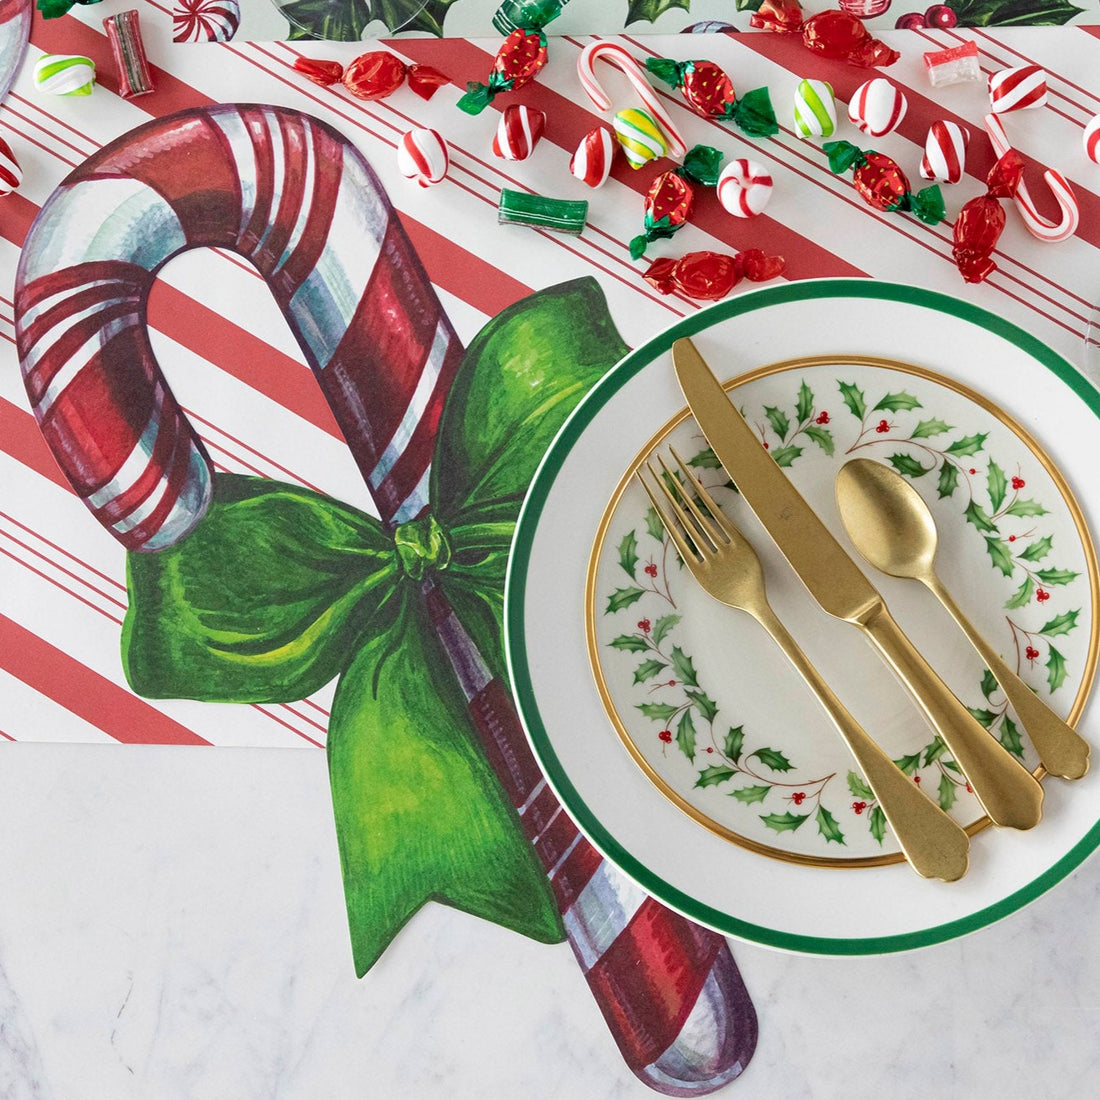 Christmas tablesetting with the Die-cut Candy Cane Placemat.